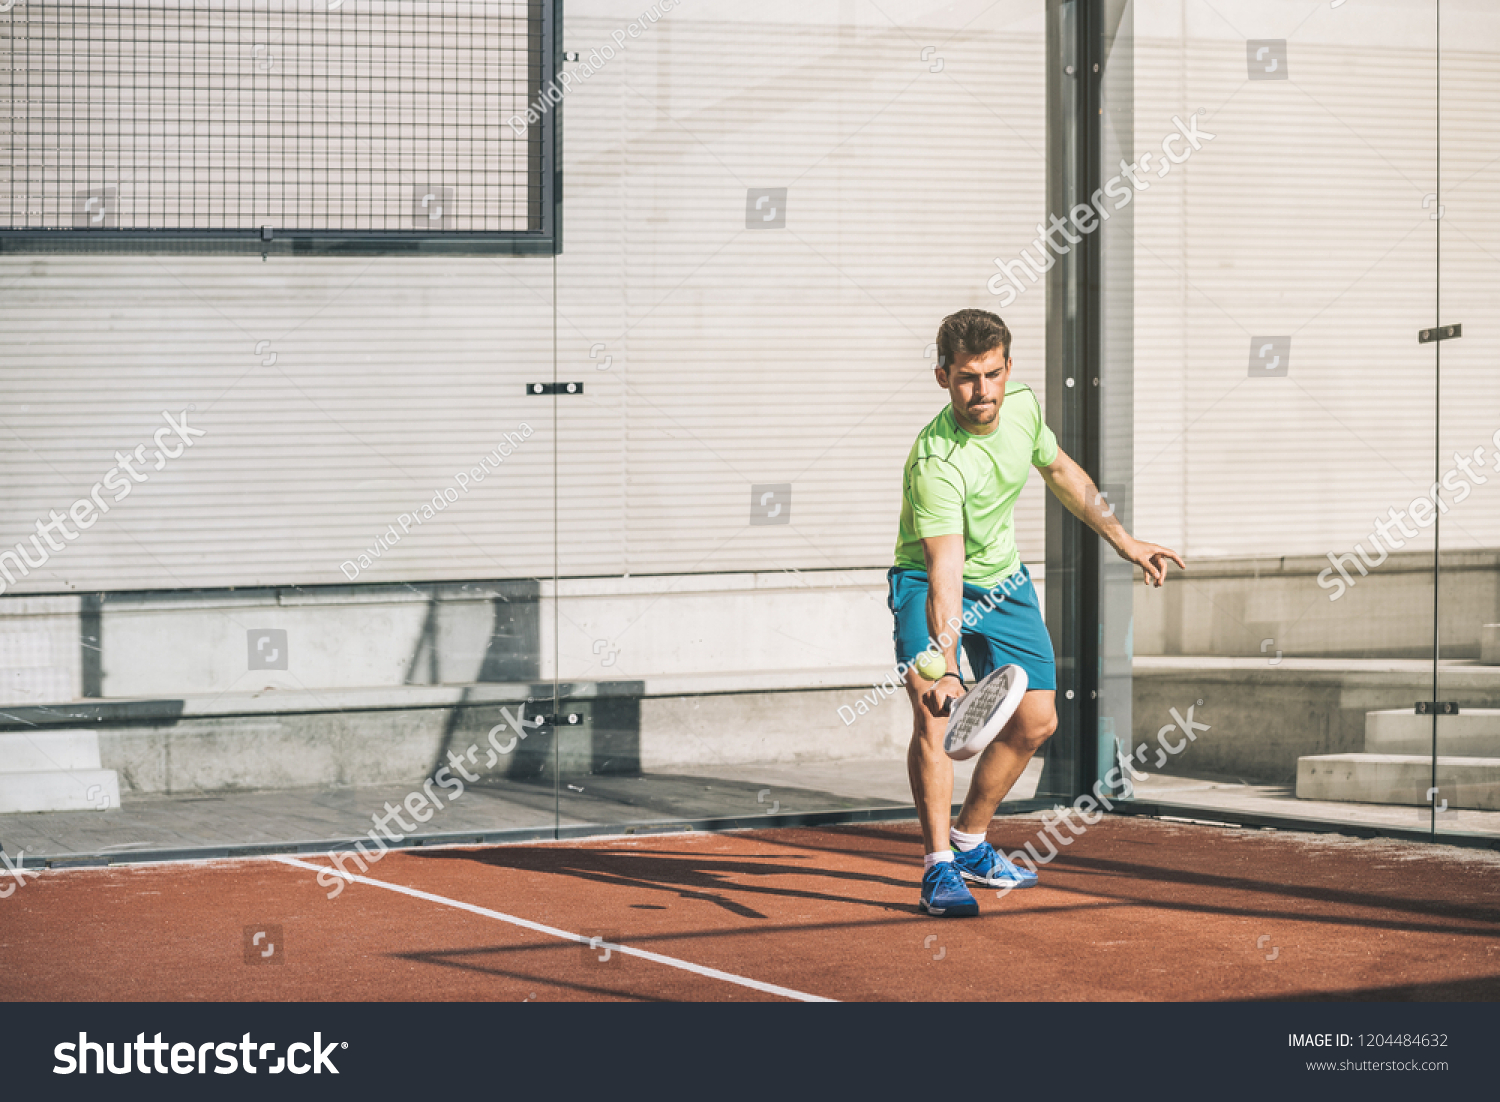 Man playing padel in a orange grass padel court outdoors behind the net #1204484632